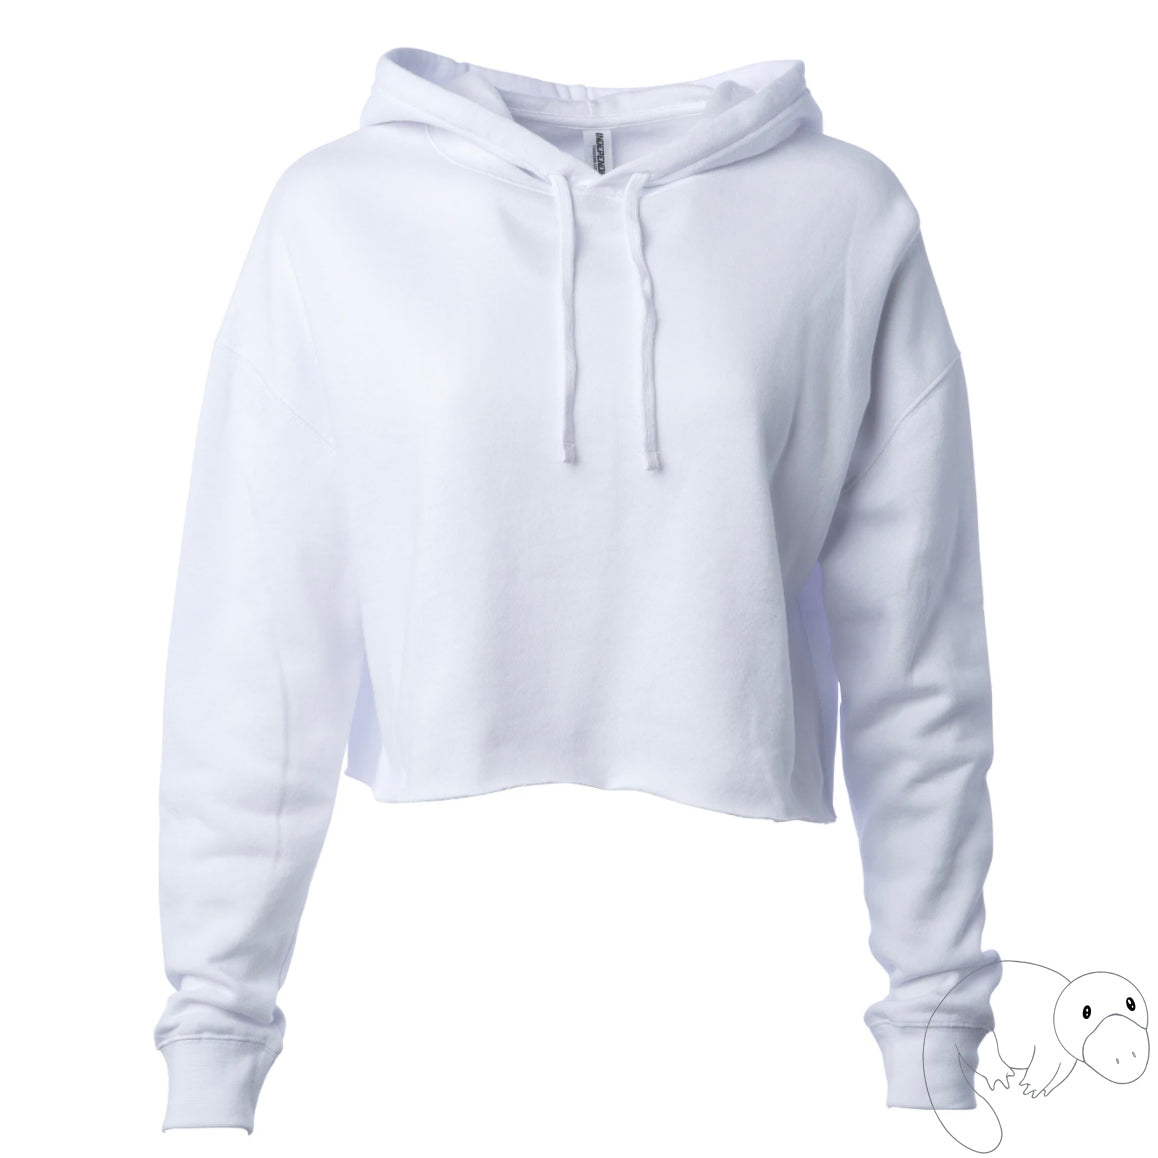 cute-hooded-sweatshirt-blank-crop-light-white-brunette-soft-hoodie-face-mask-facemaskhoodie-Plats-Hoodie-facemask-all-in-one-2-earlooops-convertible-hoodiefacemask-platinum-platypus-new-product